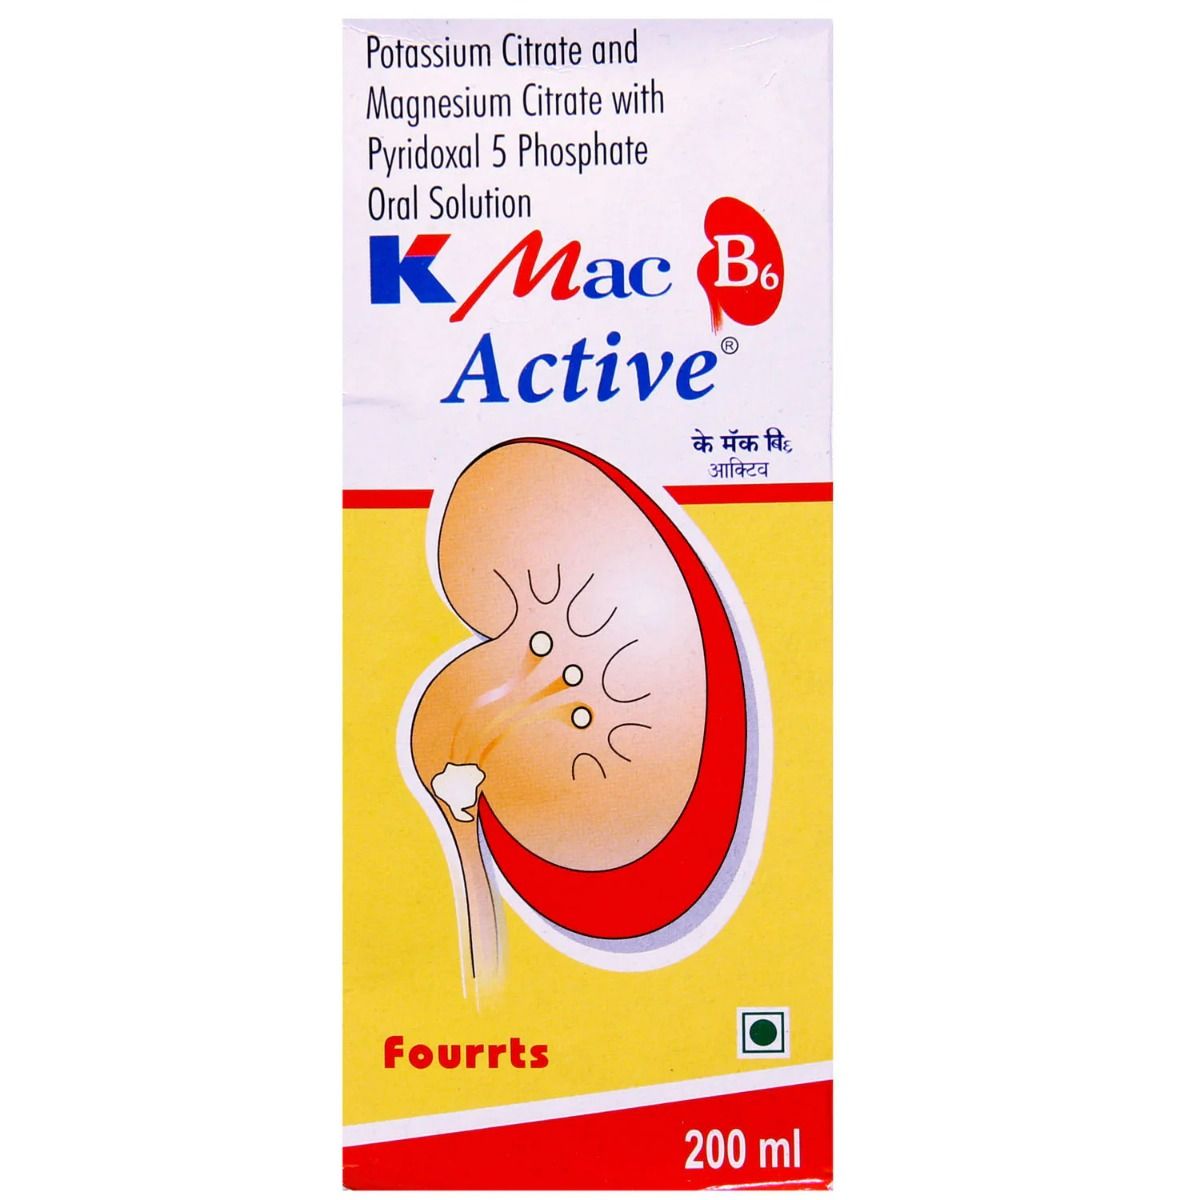 K Mac B6 Active Oral Solution 200 ml Price, Uses, Side Effects ...